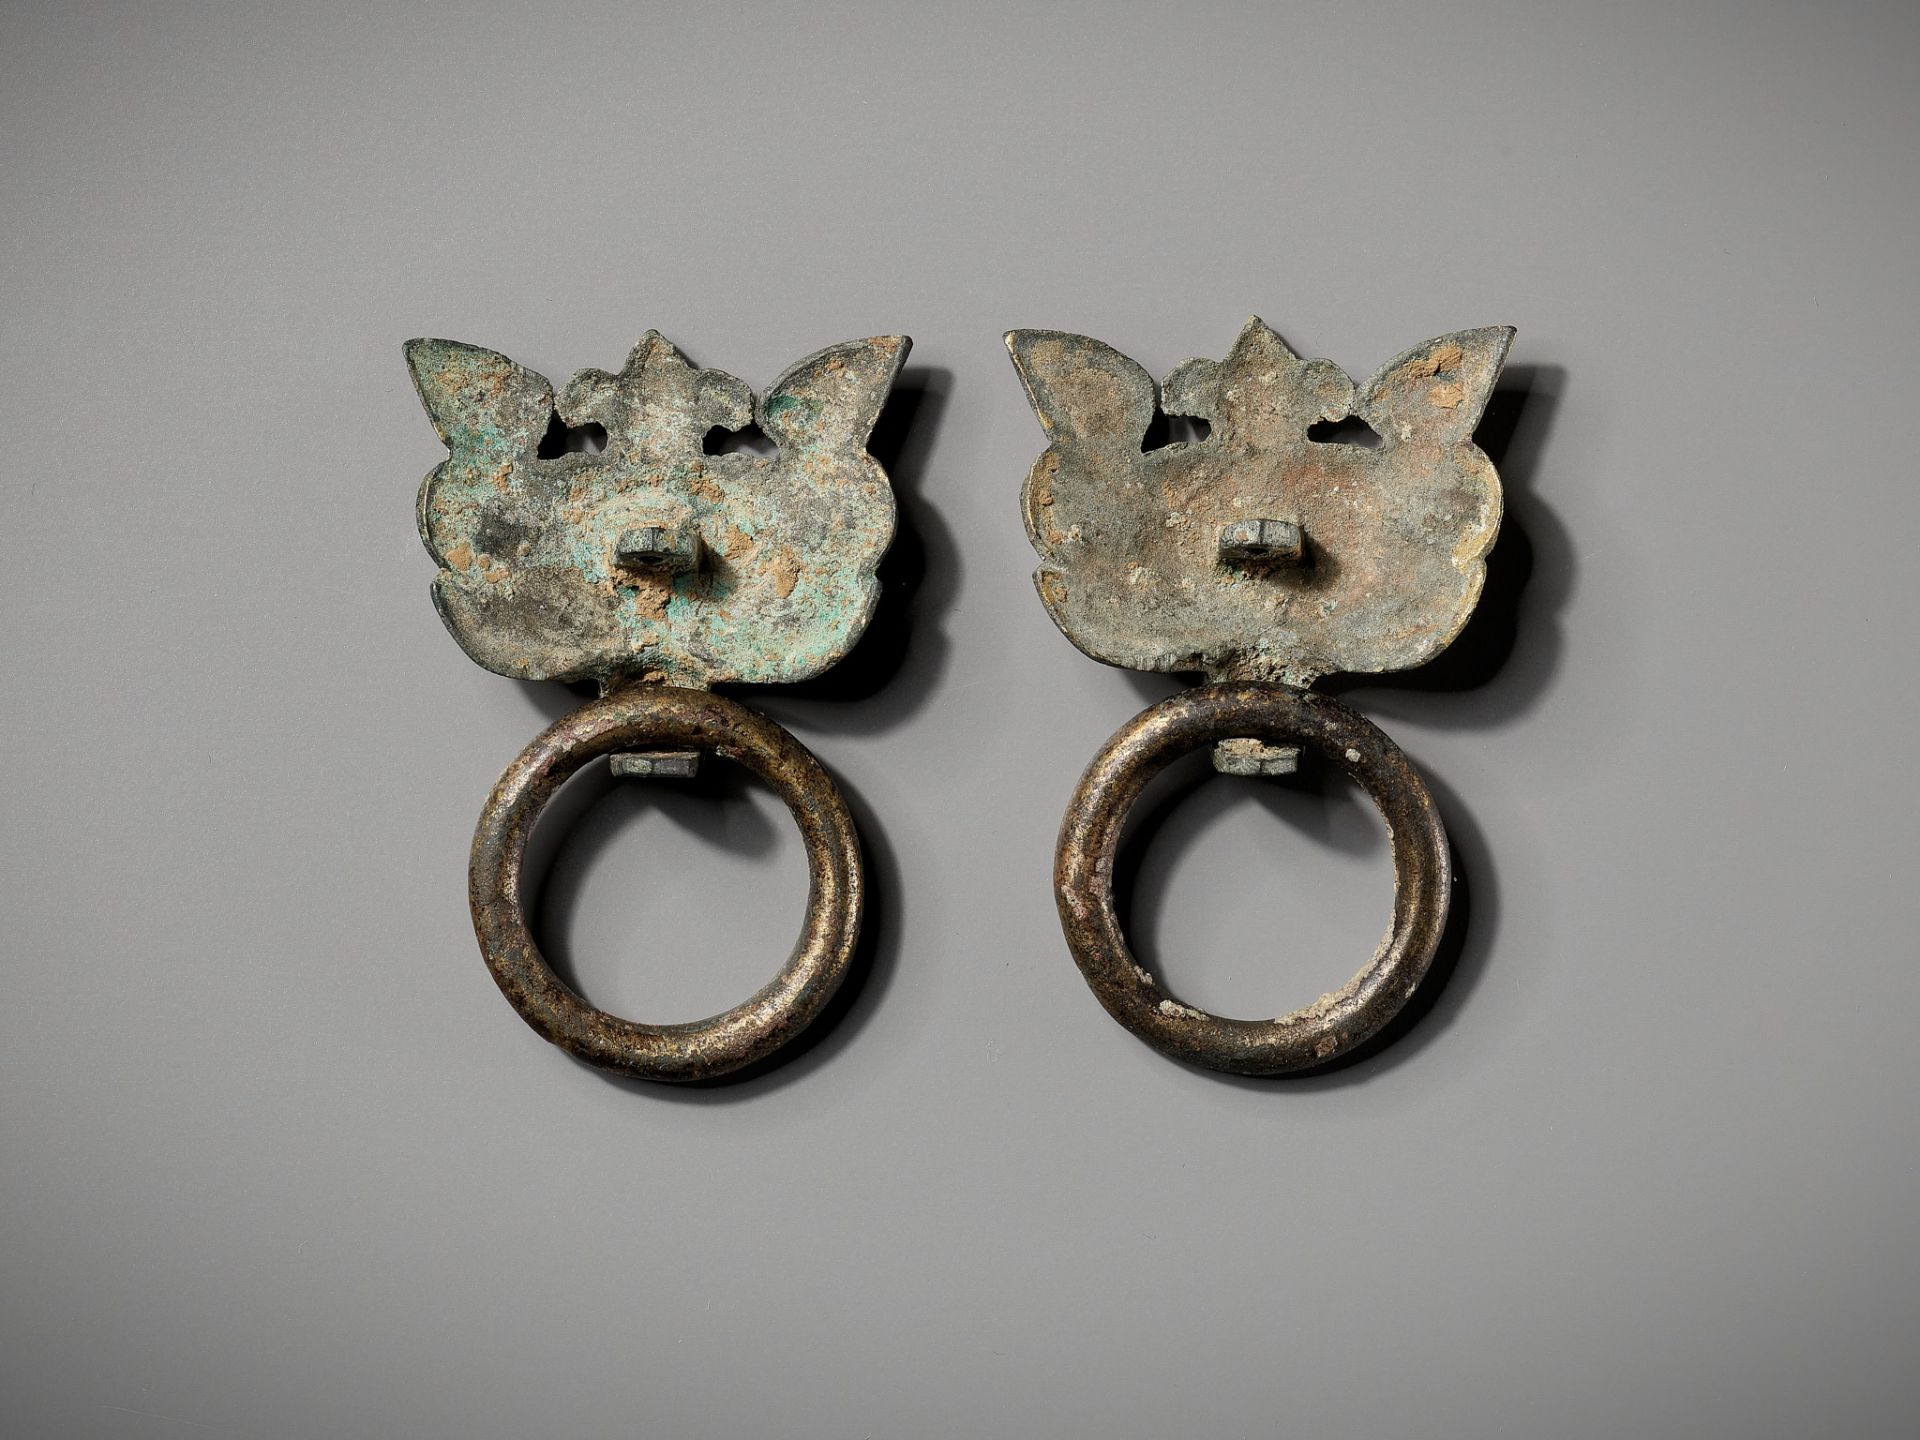 A PAIR OF GILT-BRONZE TAOTIE MASKS WITH RING HANDLES, WARRING STATES TO HAN DYNASTY - Image 8 of 11